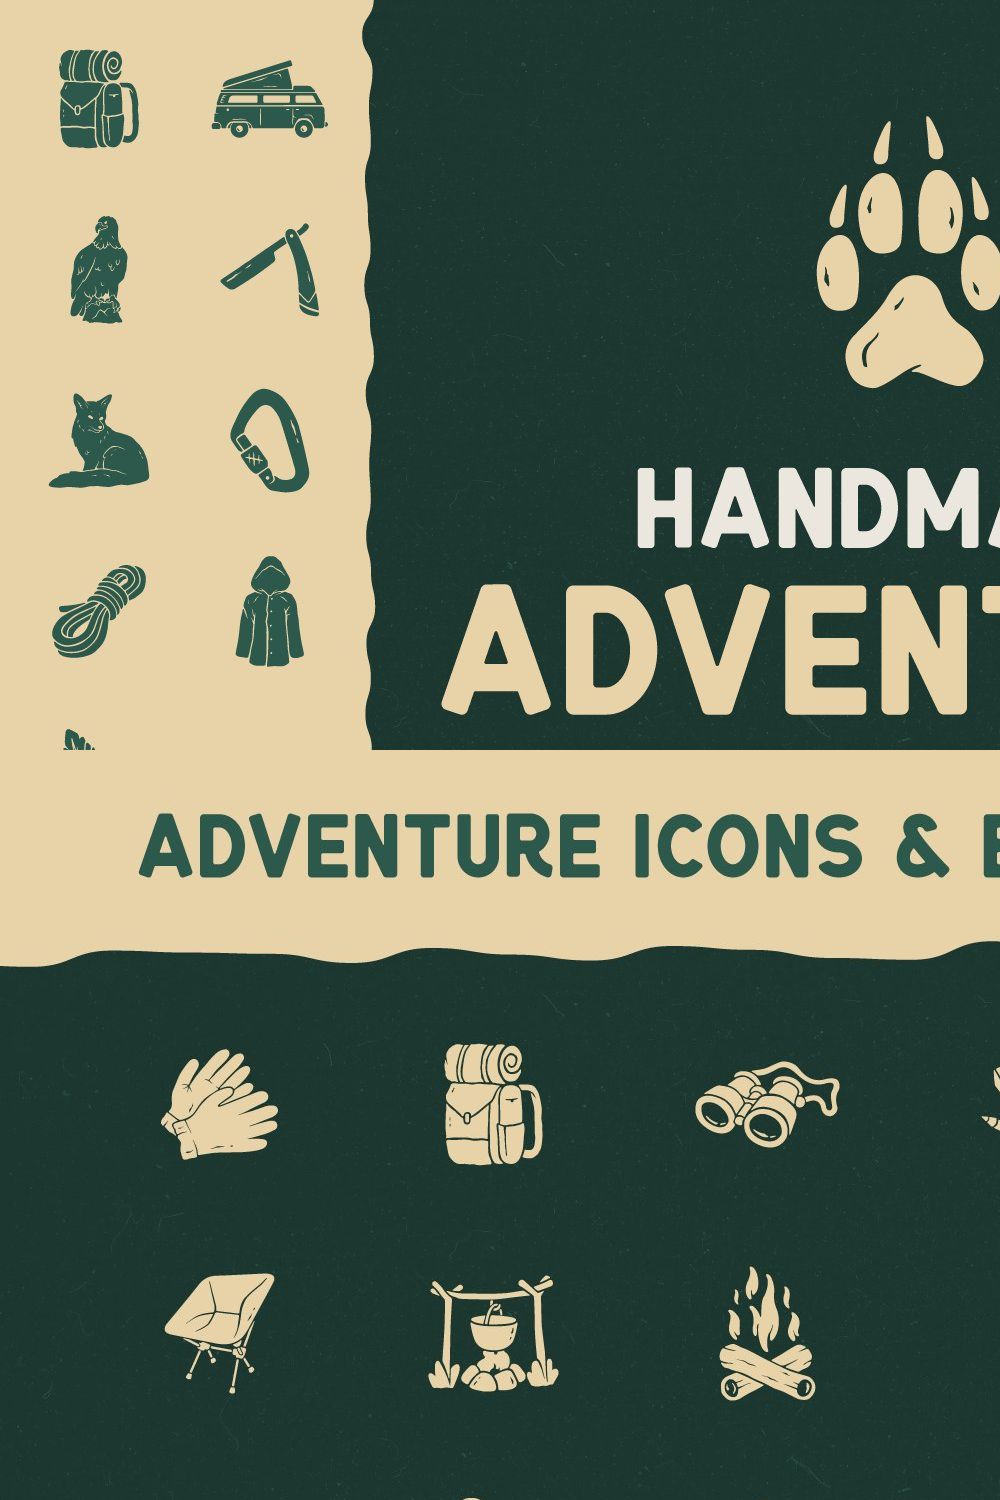 72 handmade adventure icons & badges pinterest preview image.